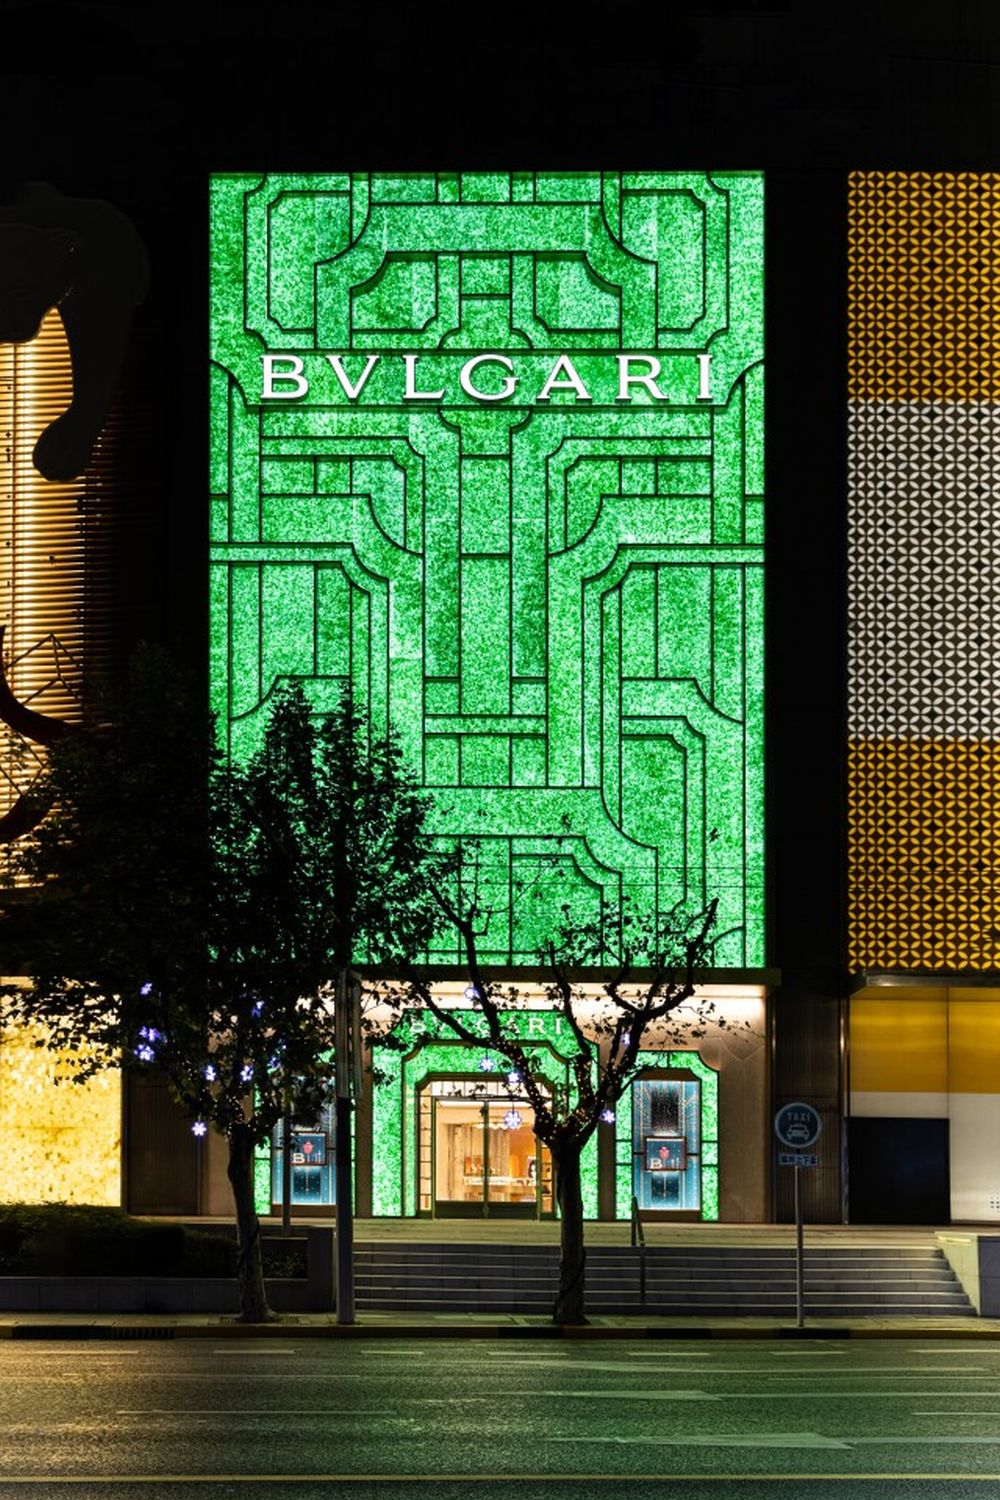 Recycled bottles transformed into green facade